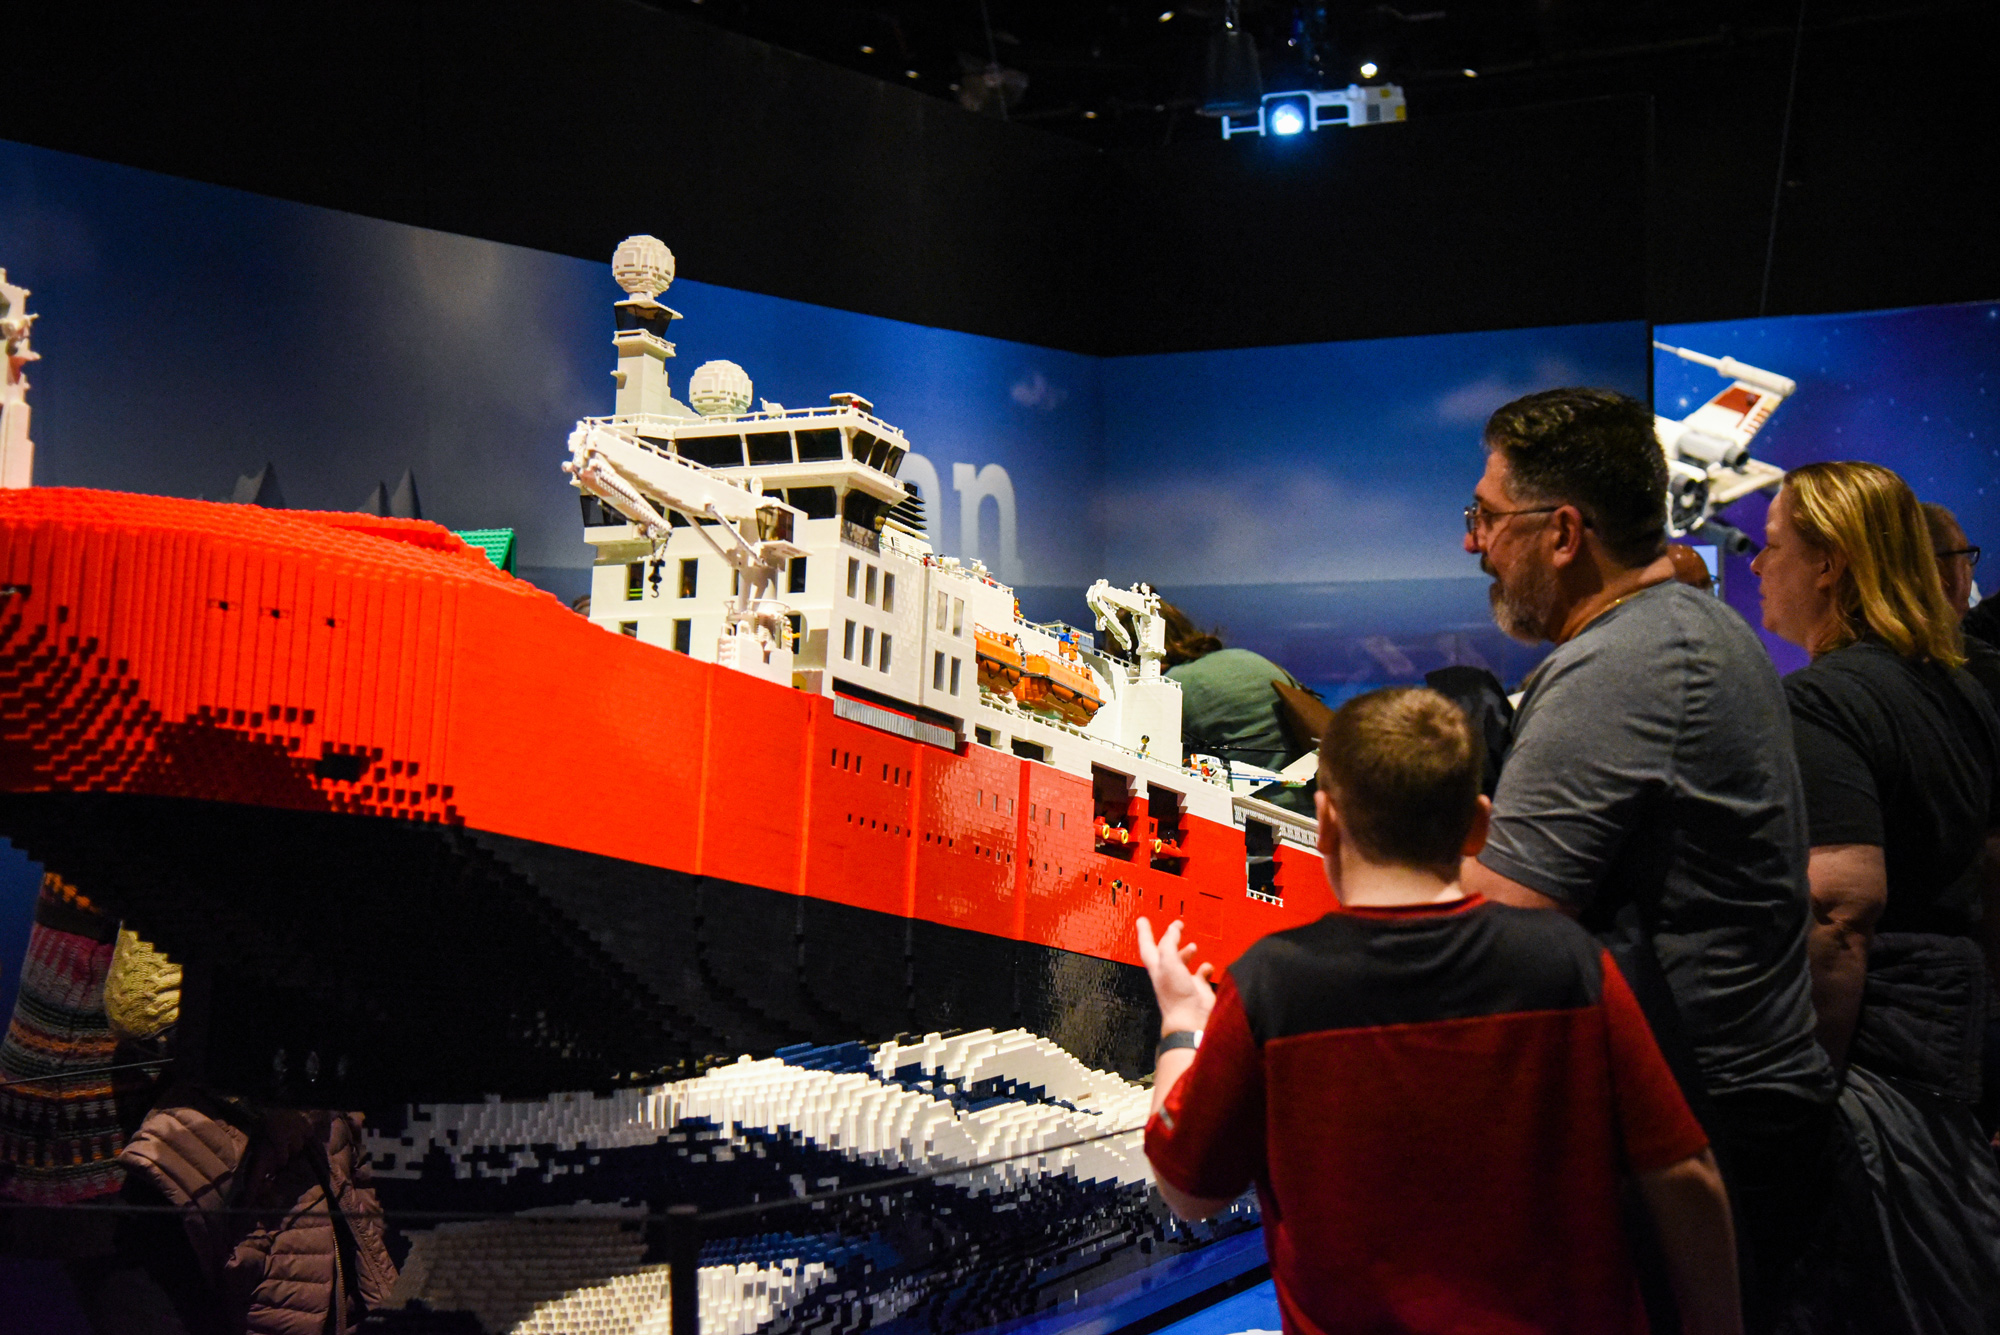 Photo from Bricktionary of a ship model